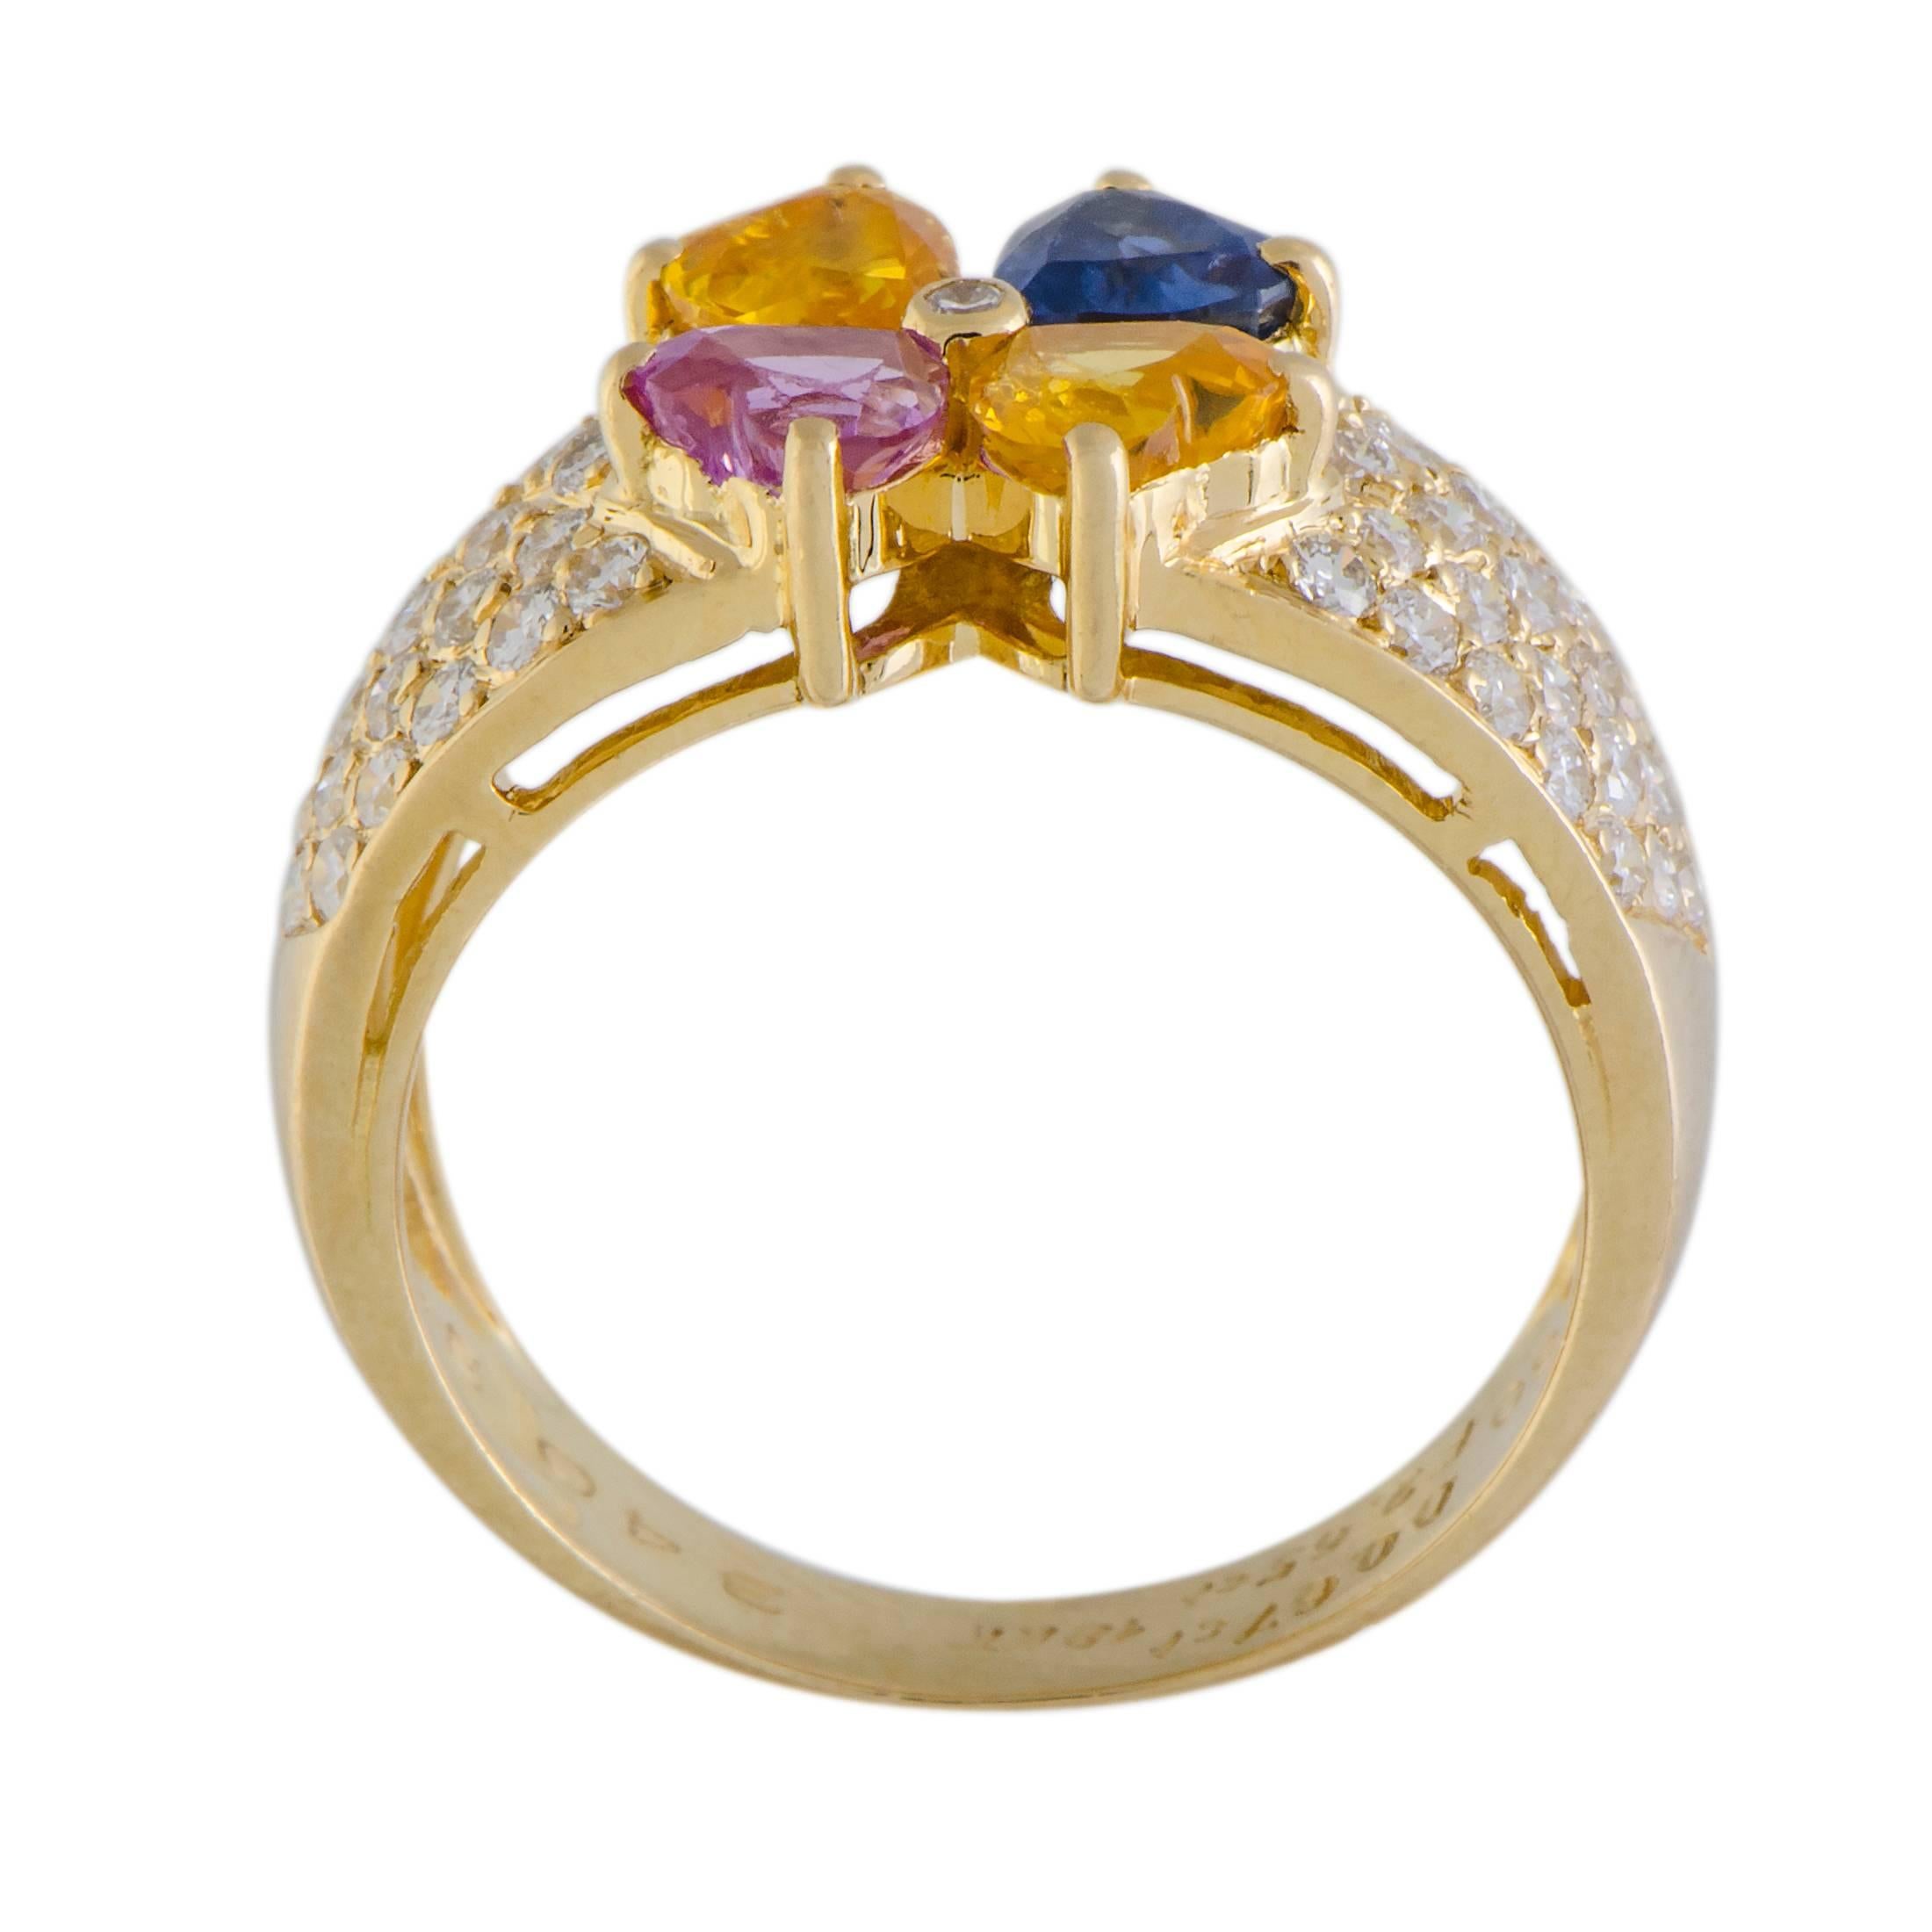 Presented by Van Cleef & Arpels, this fabulous ring from the renowned French jeweler is splendidly crafted from luxurious 18K yellow gold and boasts a stunningly sumptuous décor. The ring is set with sparkling diamonds and colorful sapphires that